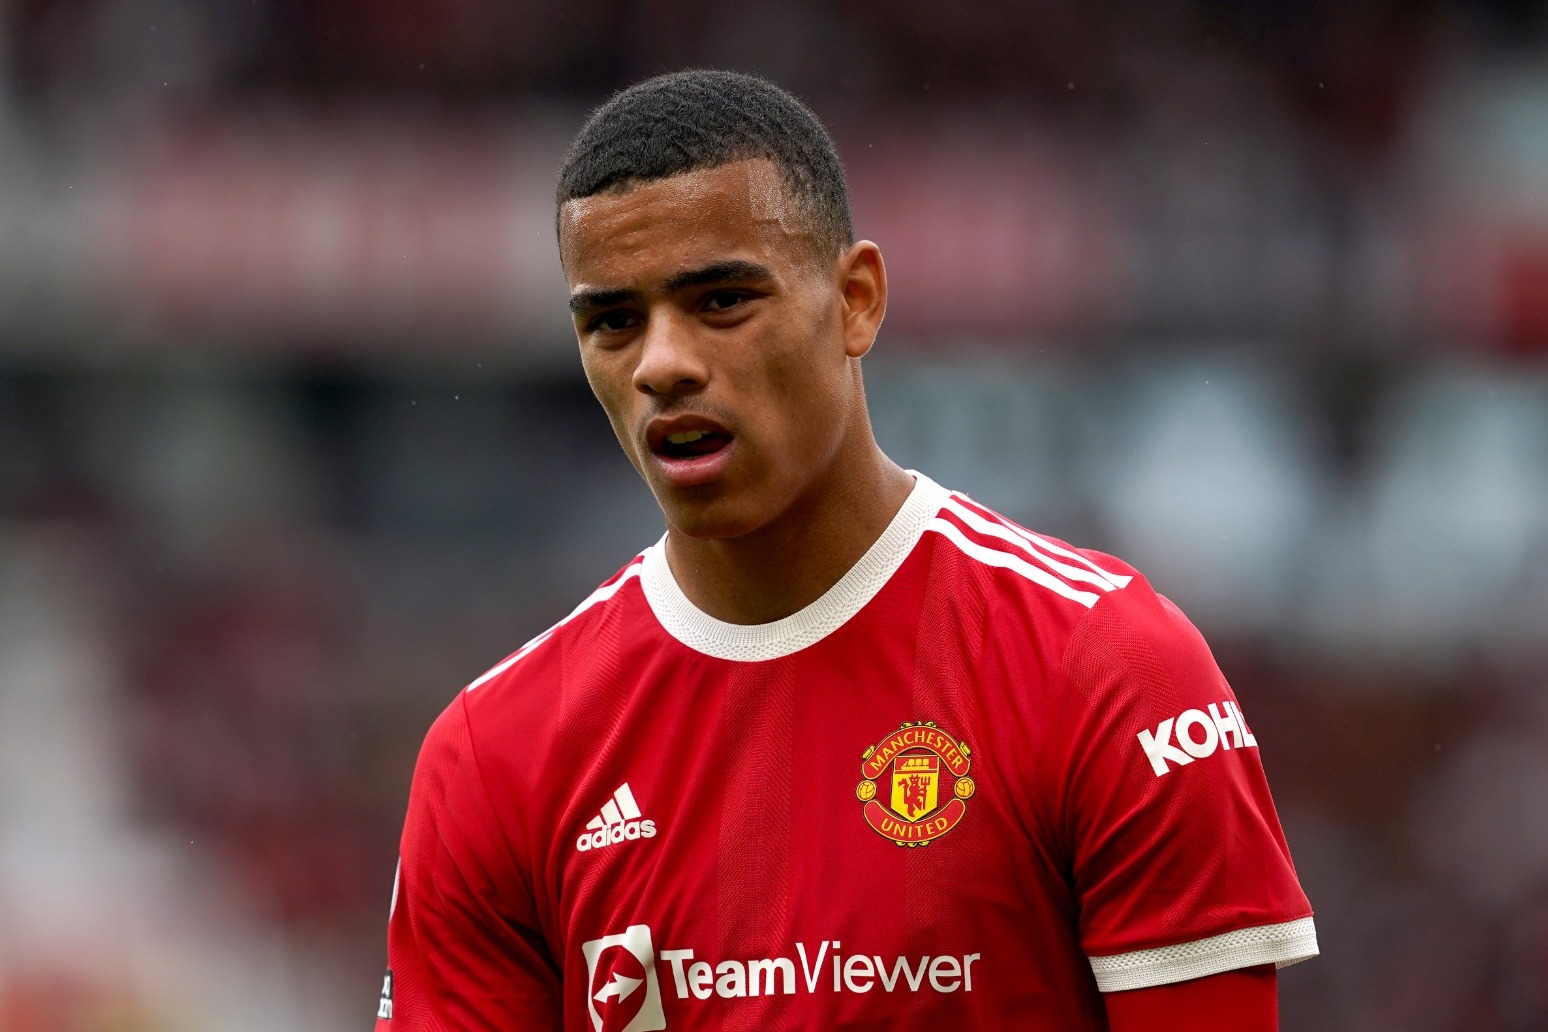 Footballer Mason Greenwood to remain on bail over rape and assault allegations 